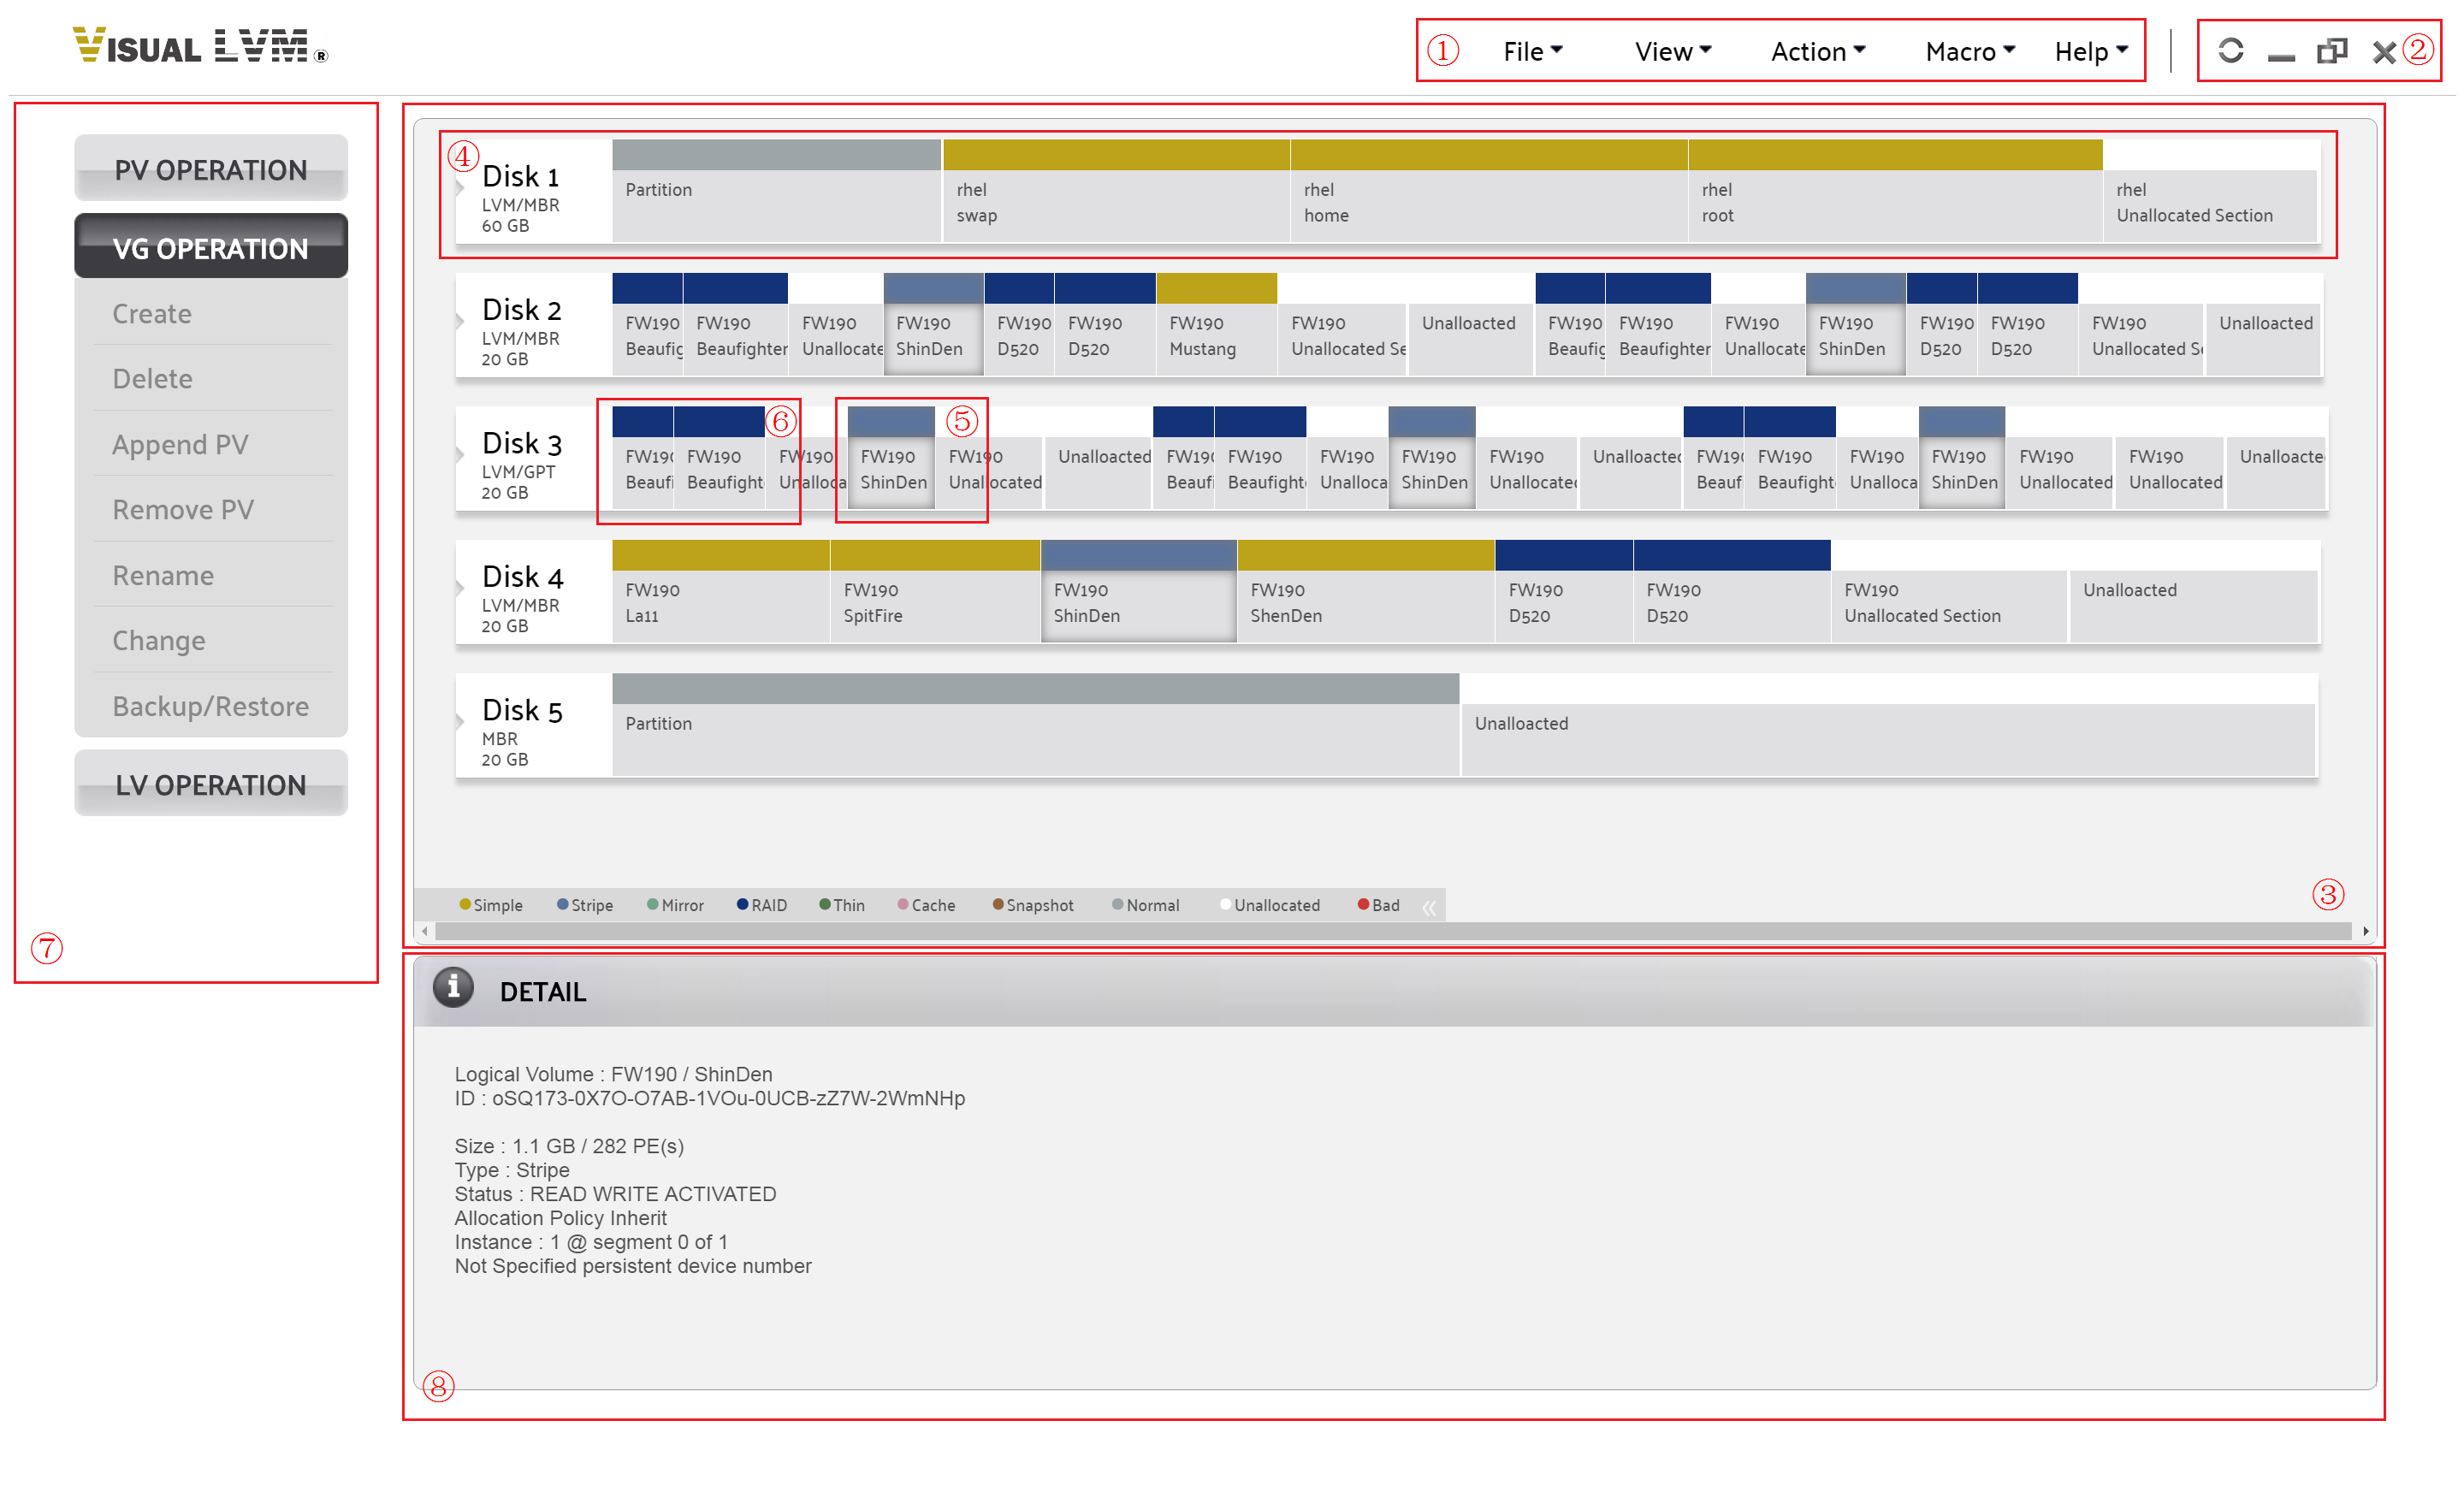 The main panel of Visual LVM